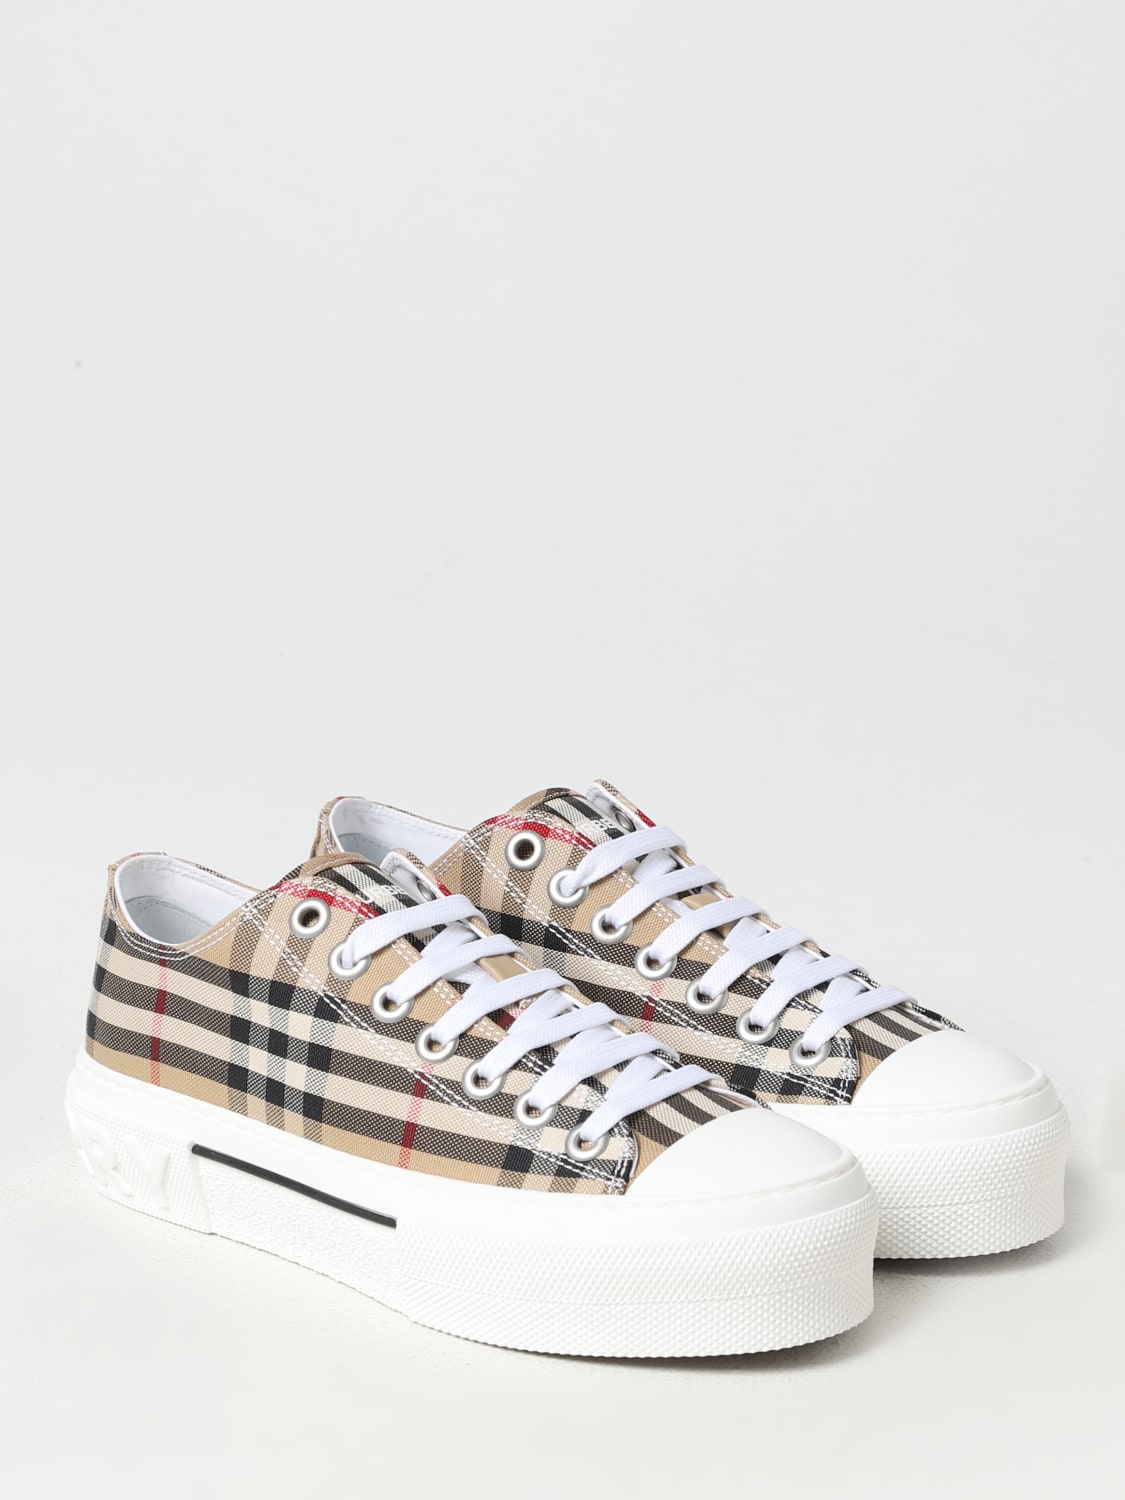 BURBERRY: sneakers in check cotton - Beige | Burberry sneakers 8050506 ...